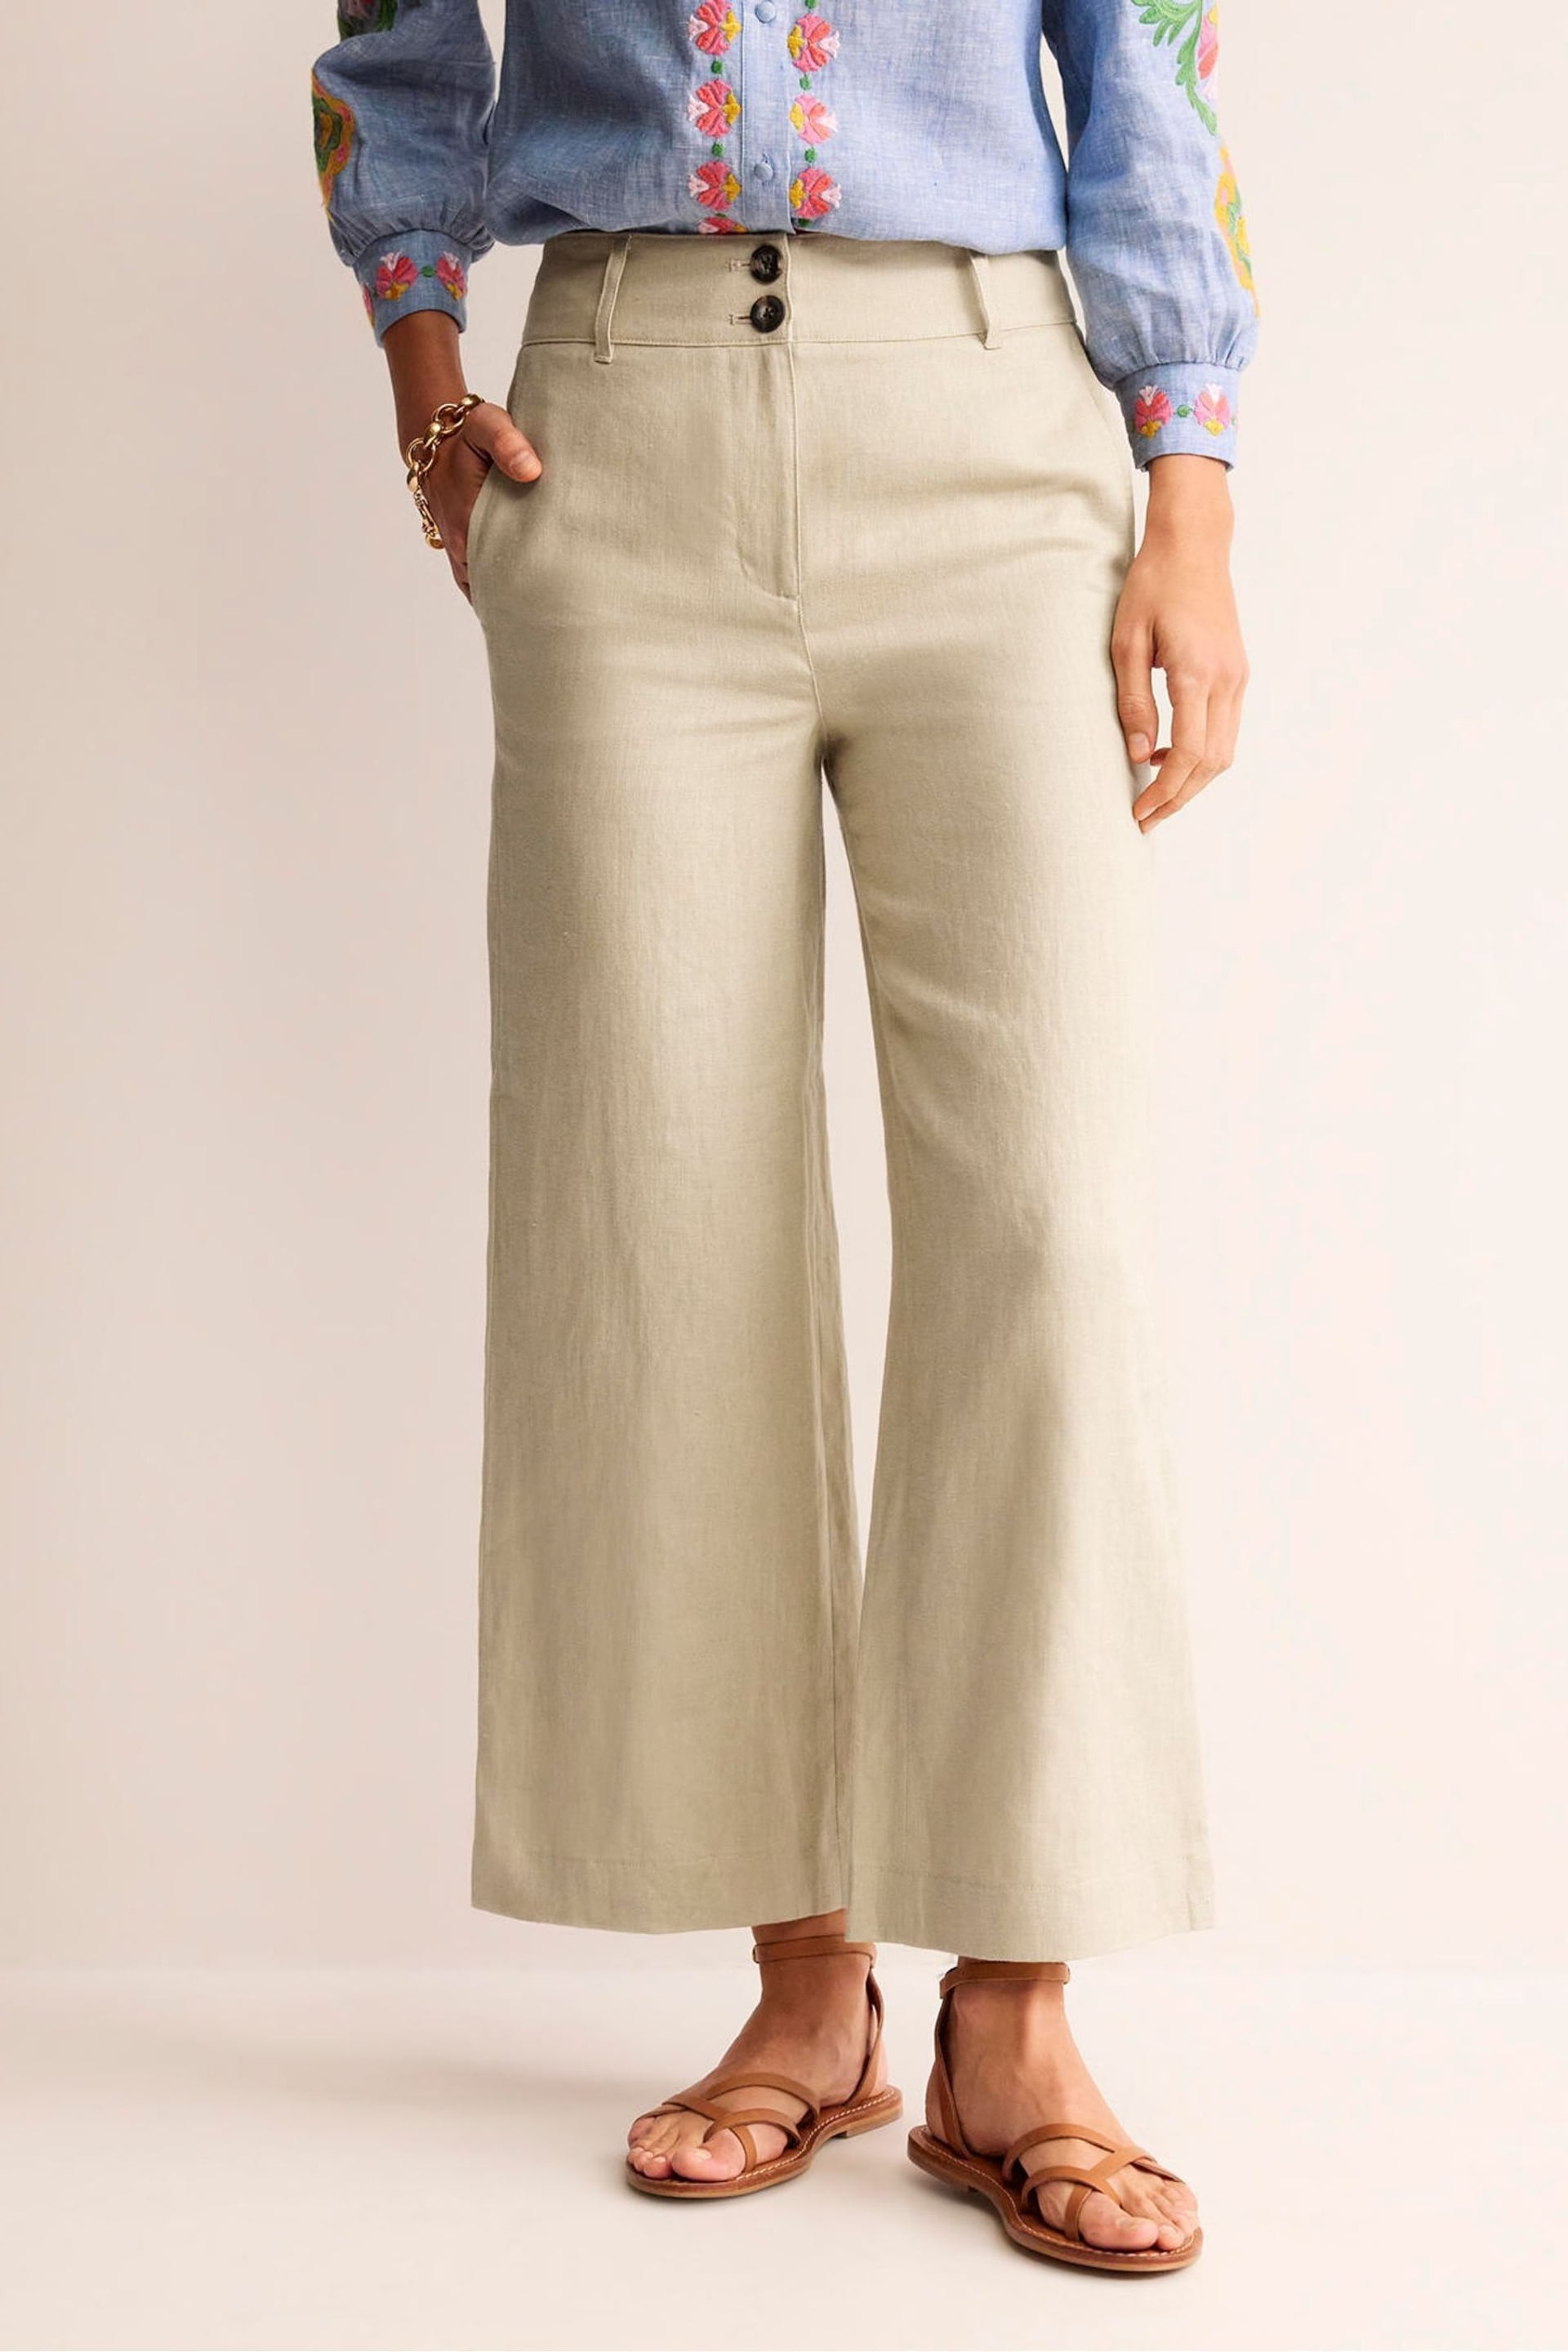 Boden Natural Westbourne Crop Linen Trousers - Image 1 of 5